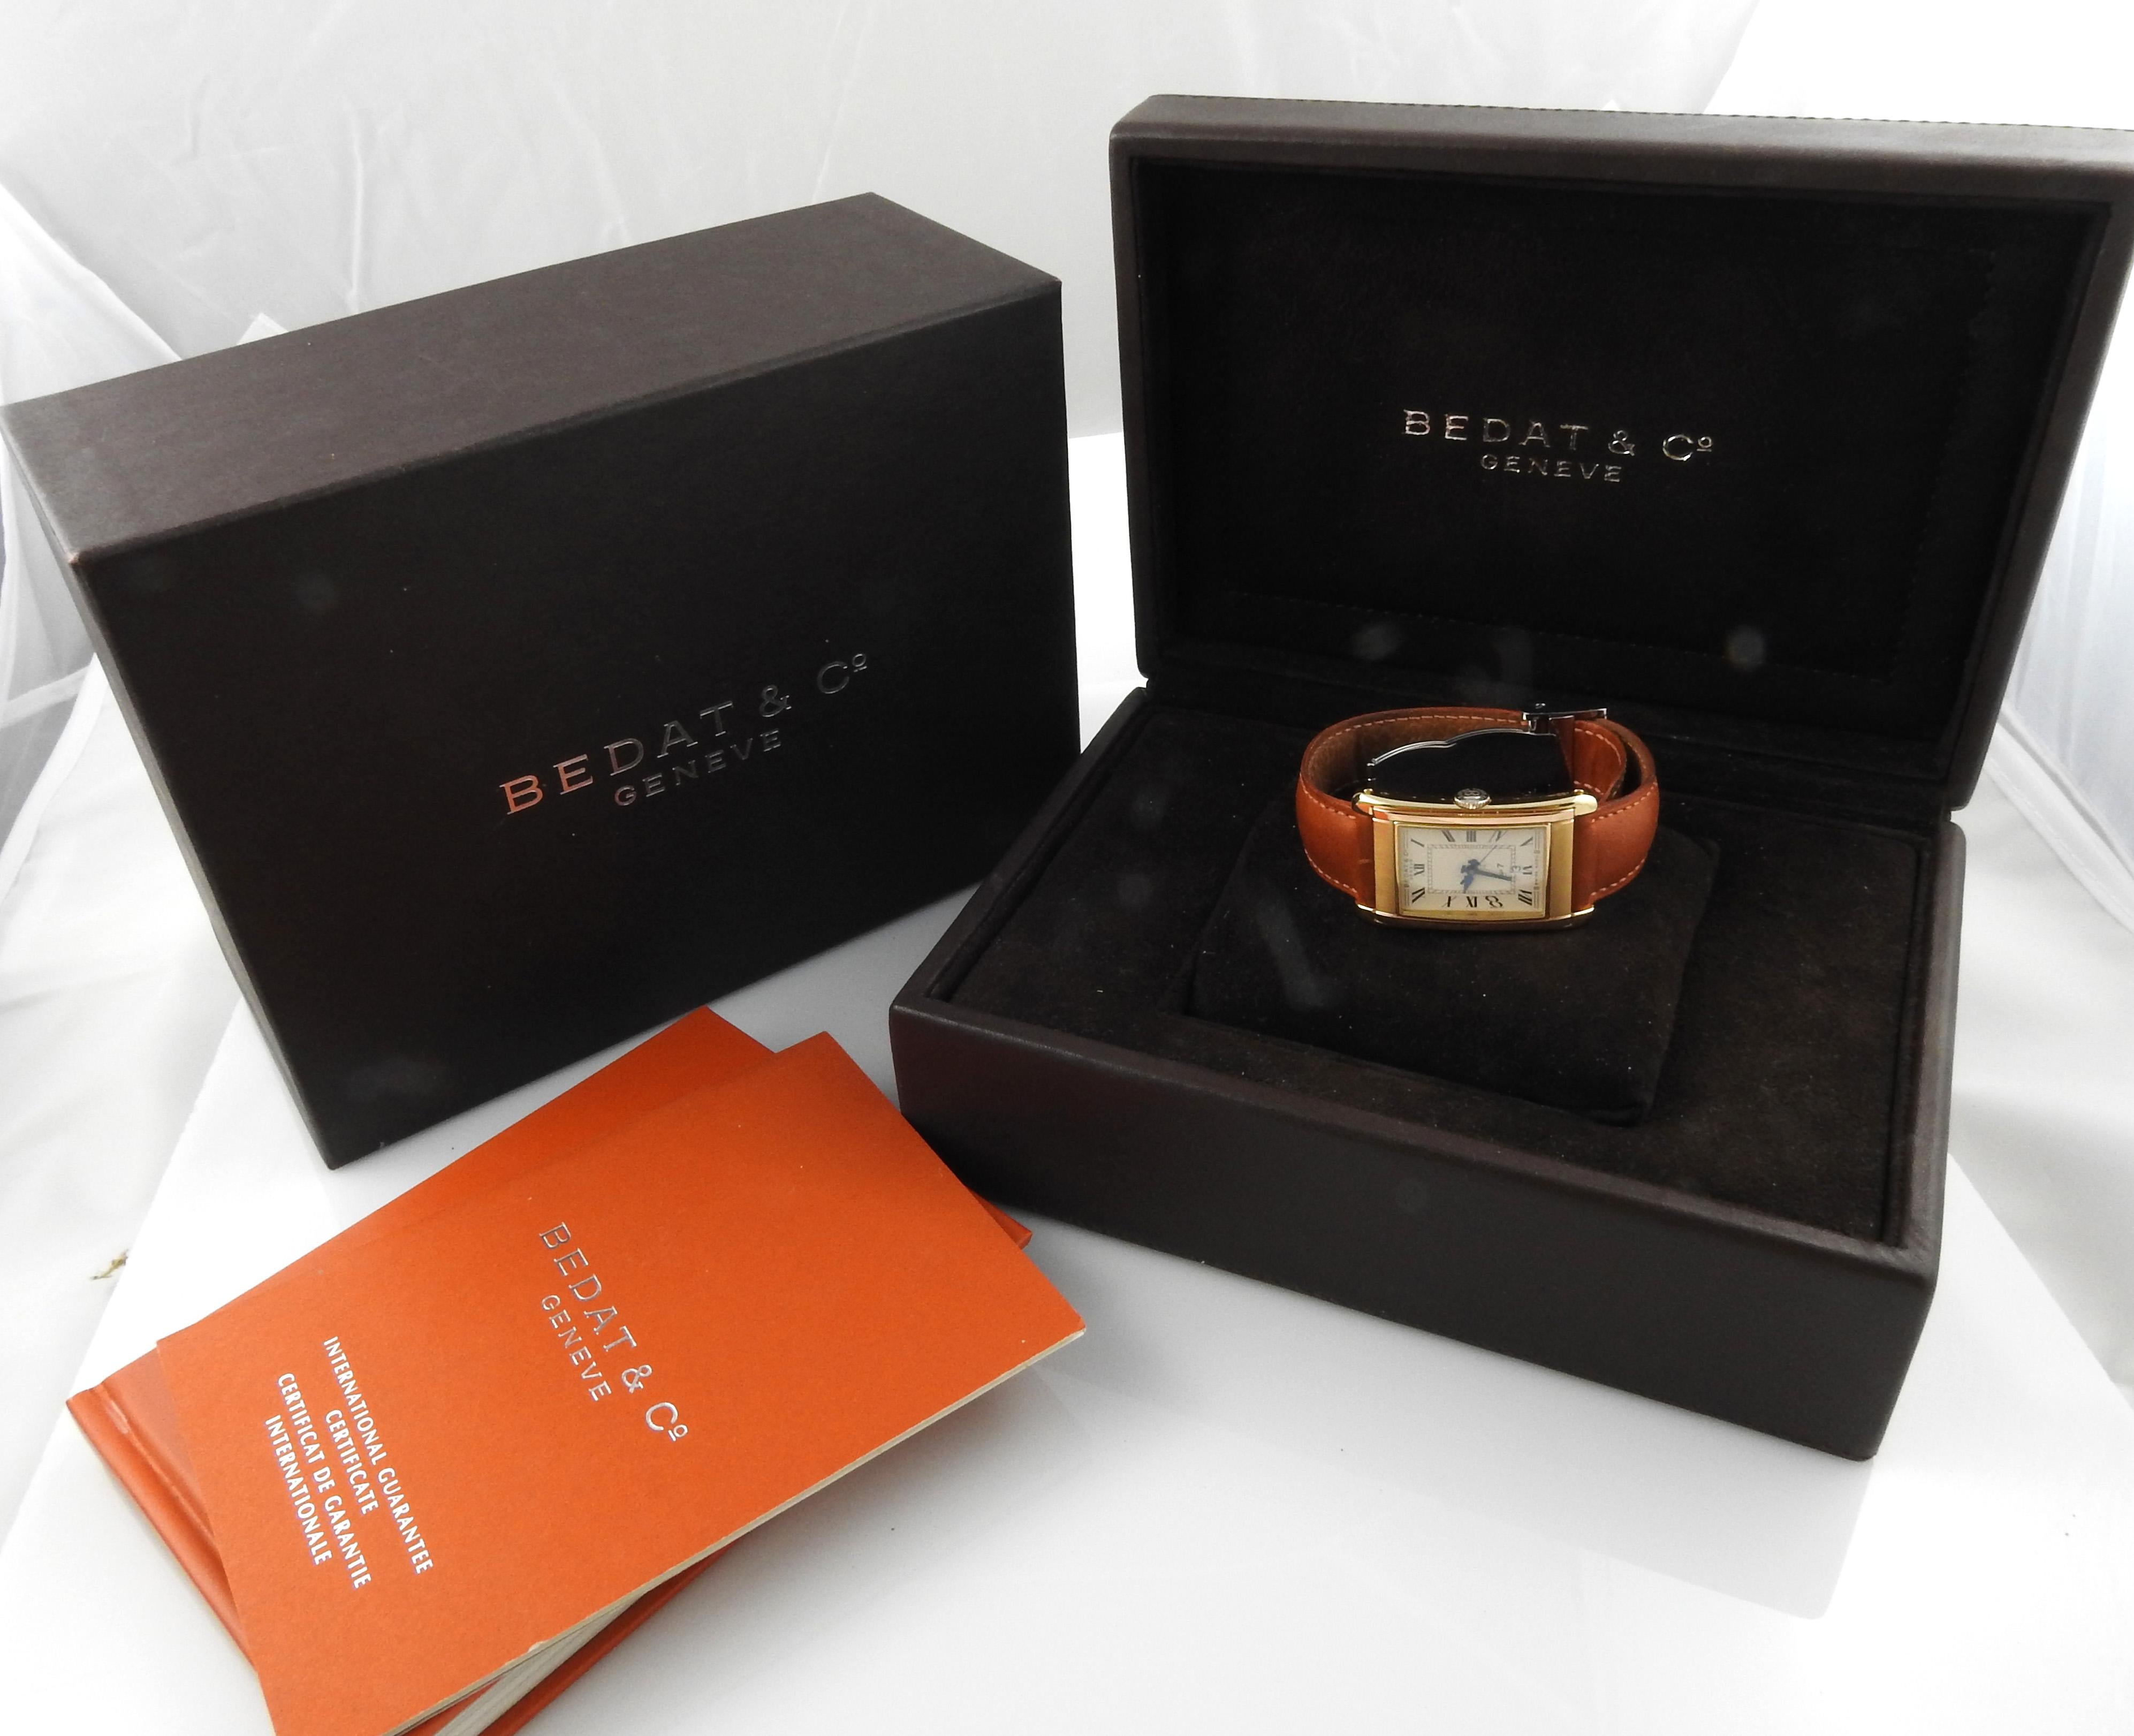 Bedat & Co. No. 7 18 Karat Yellow and Rose Gold Men's Watch with Box and Papers 5